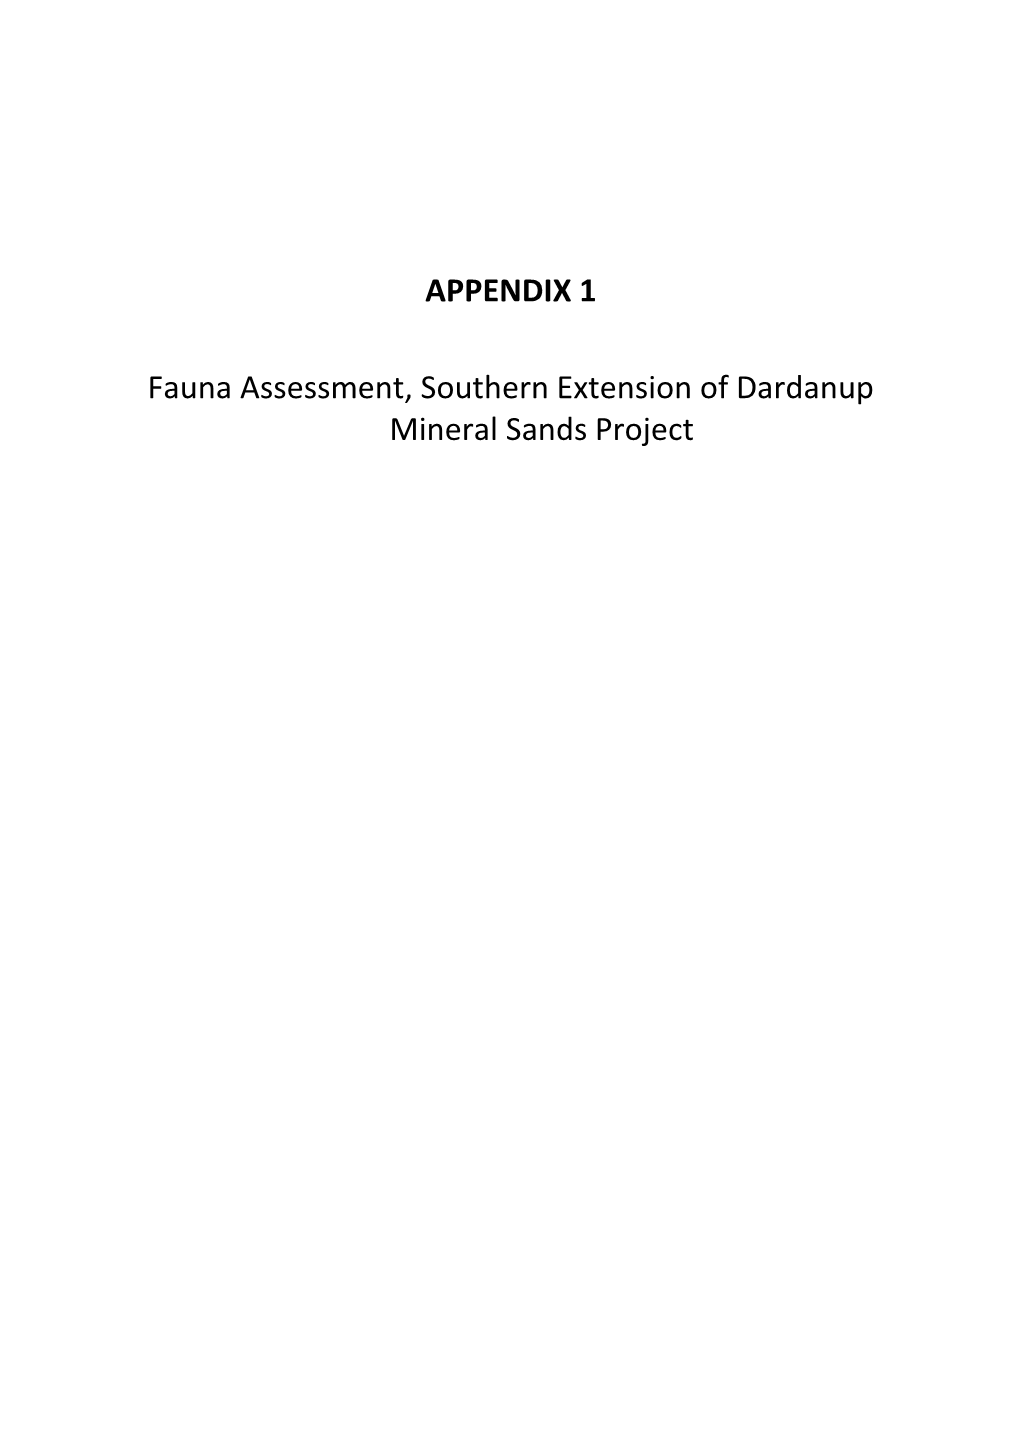 APPENDIX 1 Fauna Assessment, Southern Extension of Dardanup